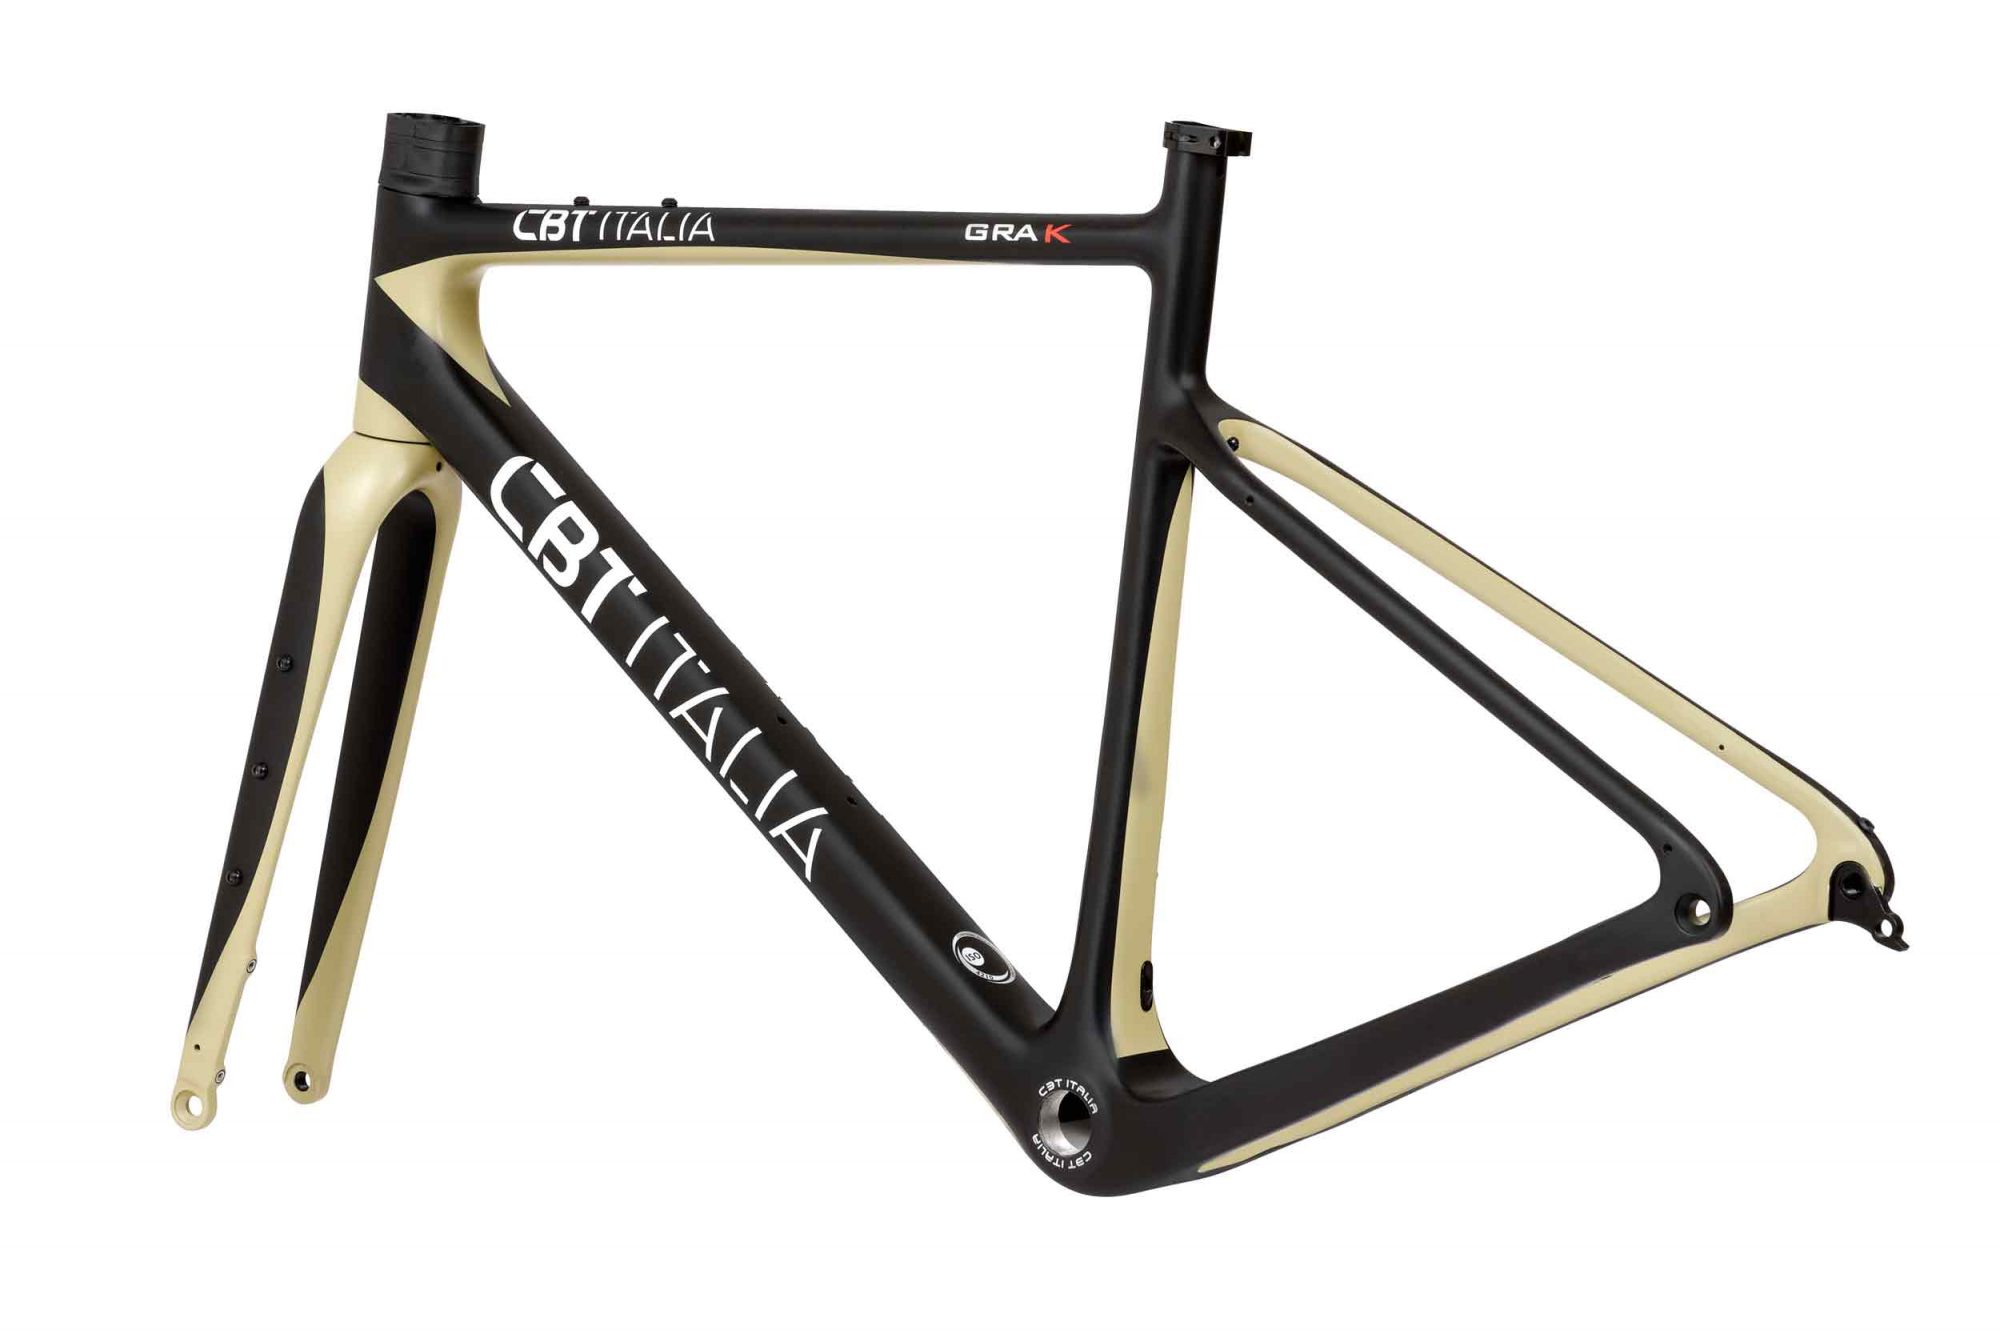 The cbt grak is also available as a frame kit (incl. Fork and headset). This costs 1,499 euros.